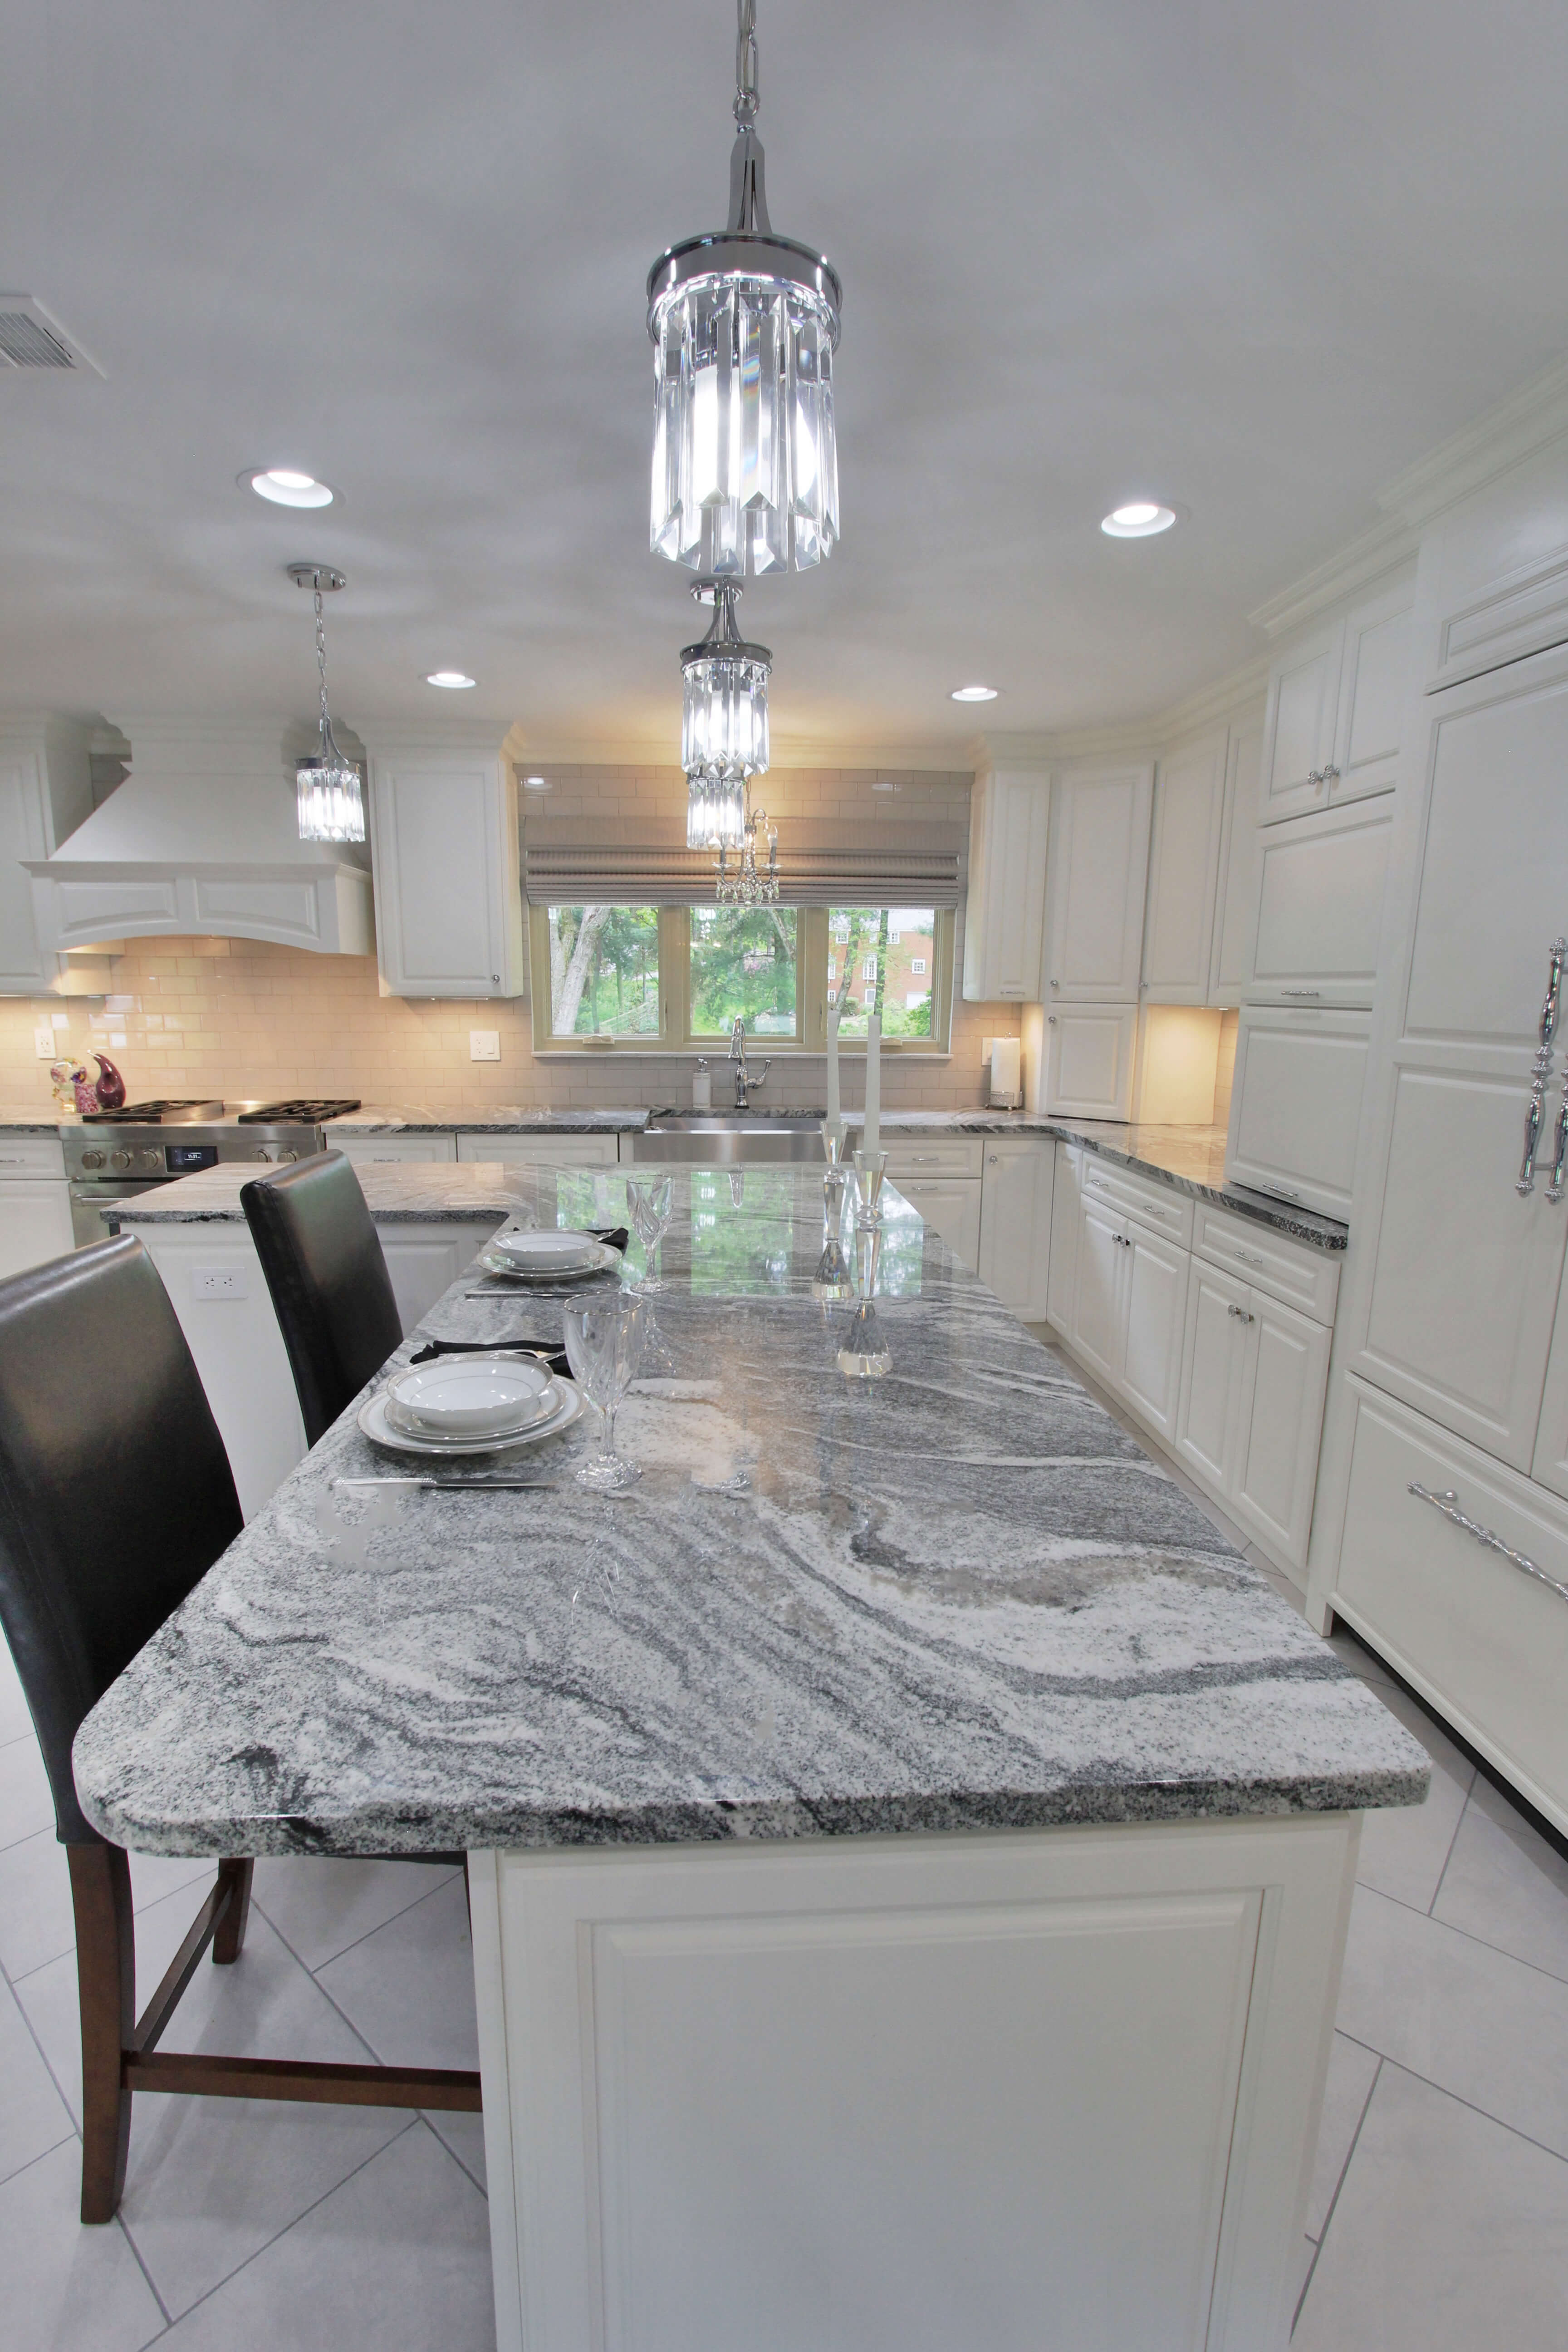 These countertops were an important part of completing this client's kitchen design. 